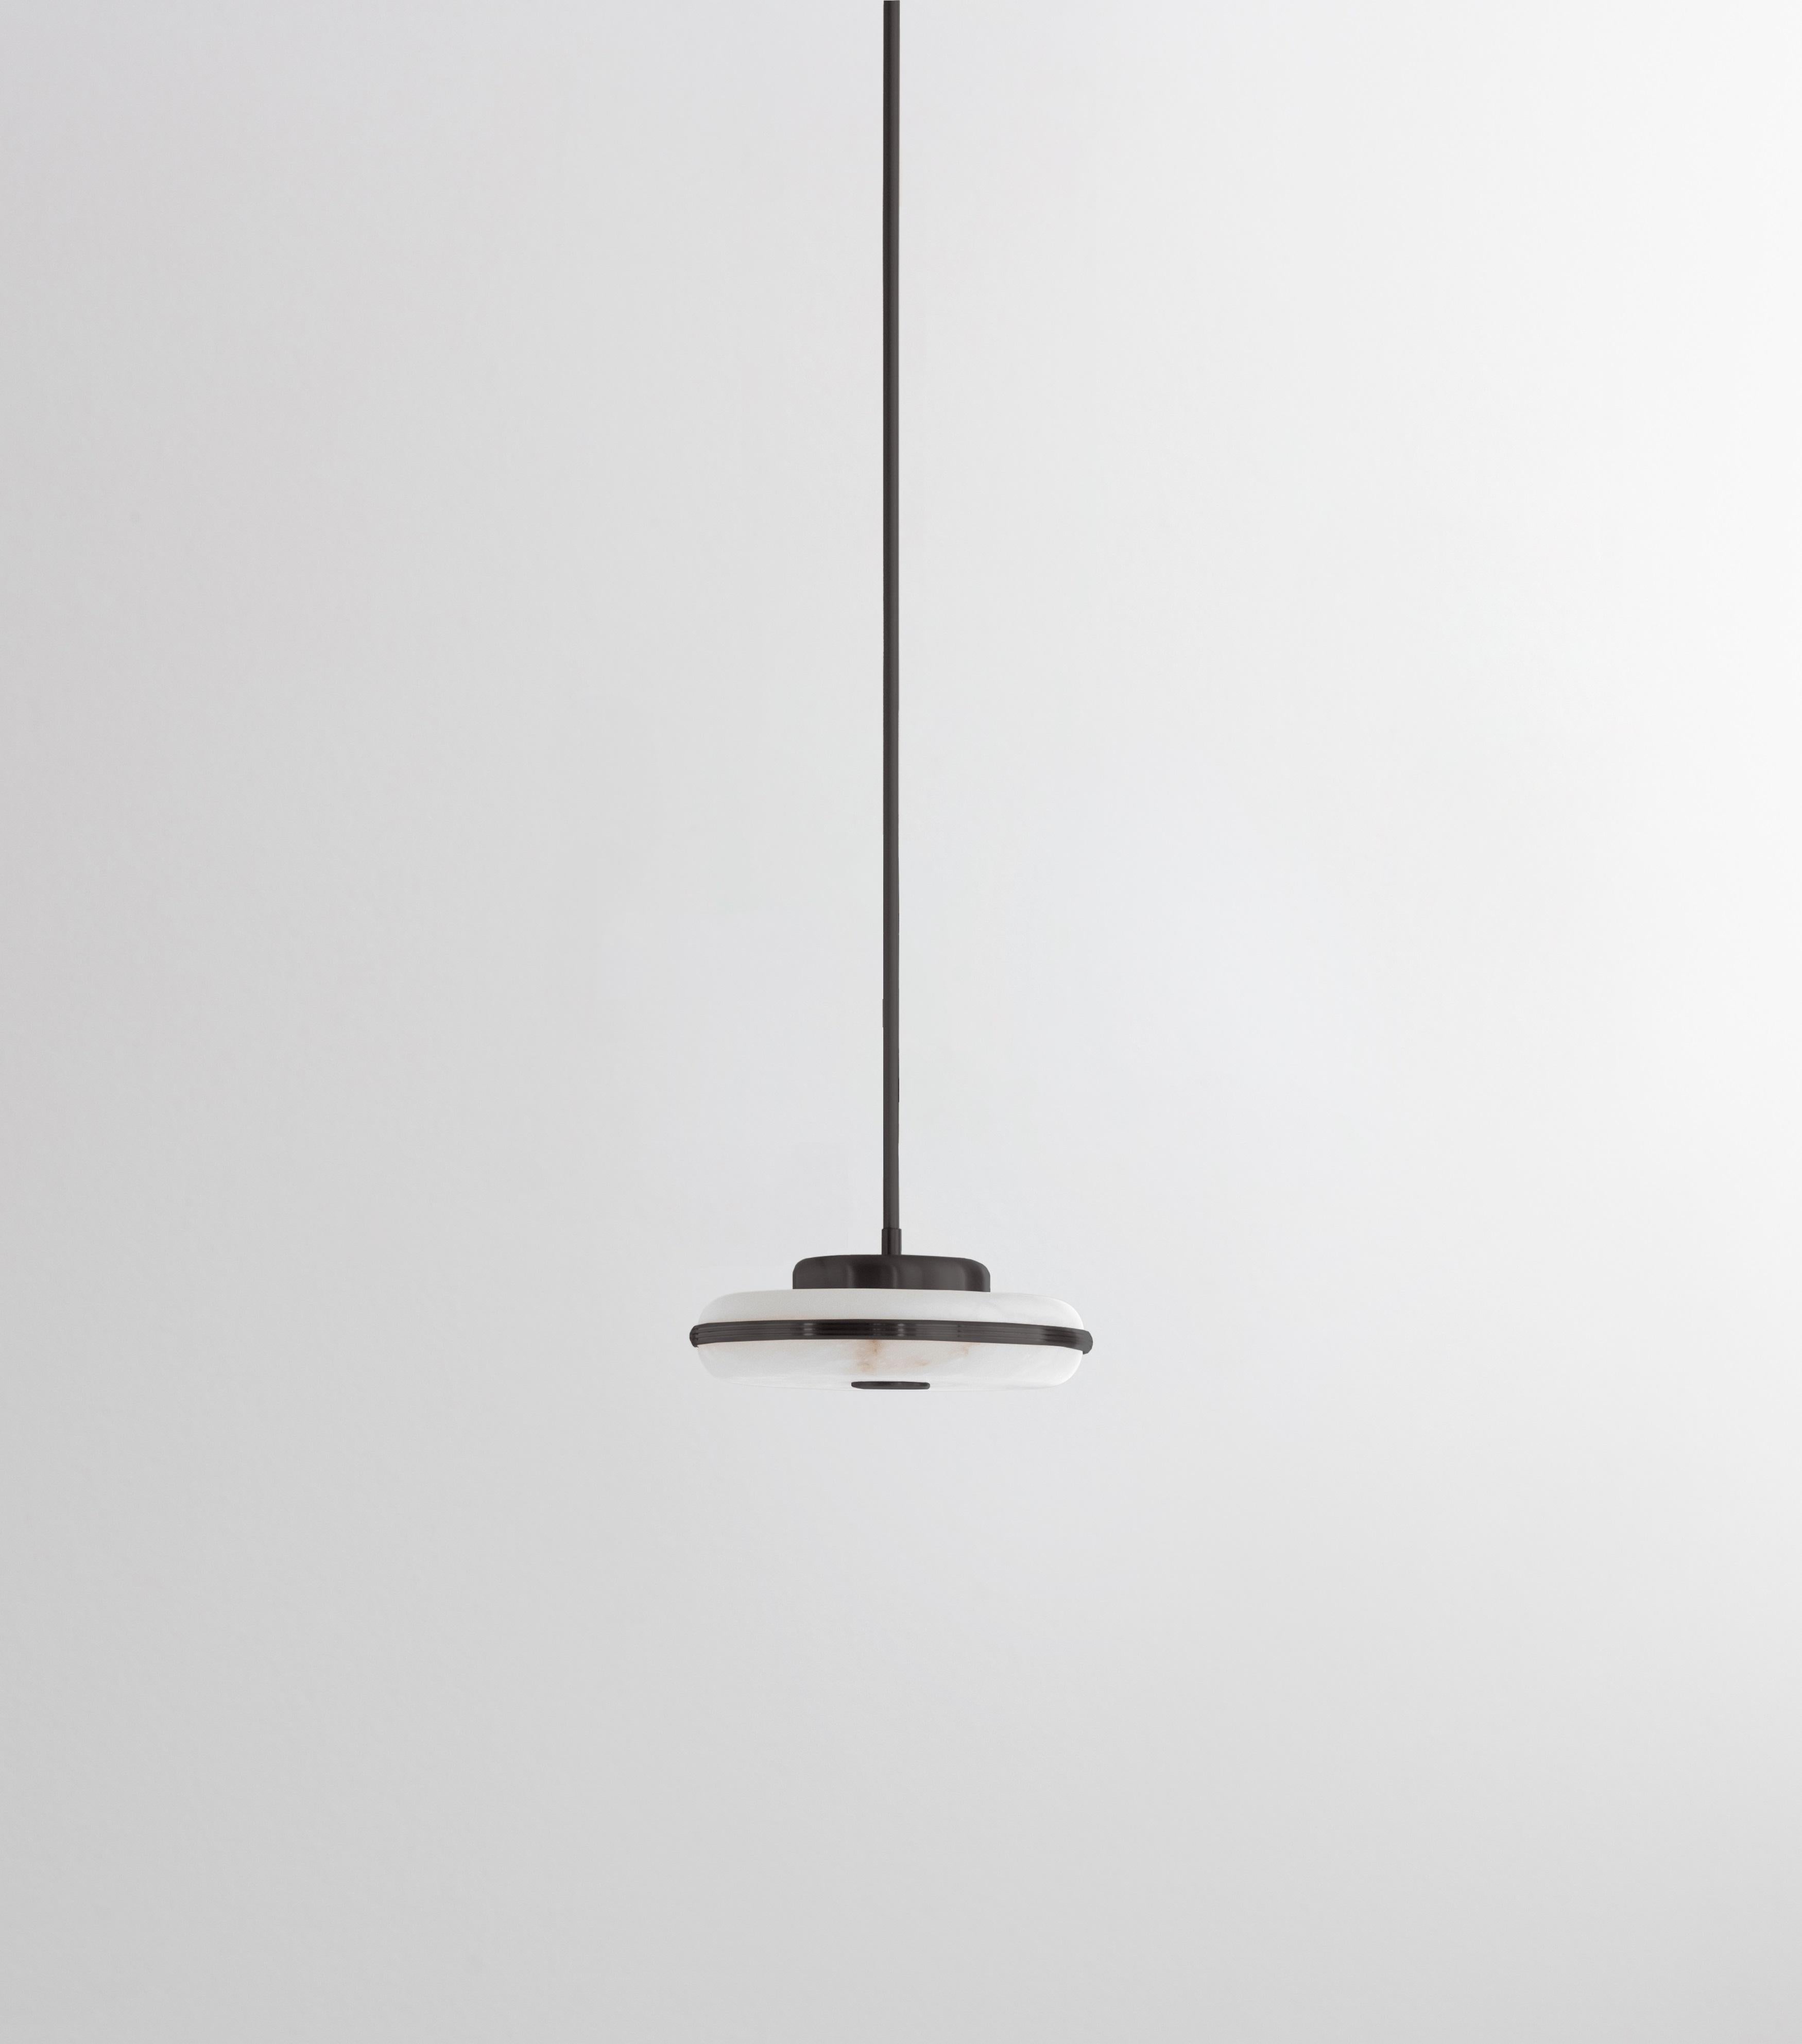 Beran Dark Bronze Small Pendant Lamp by Bert Frank
Dimensions: Ø 26 x H 6 cm. 
Materials: Dark bronze and alabaster.

Available in two different sizes. Available in different finishes and materials. Height is customized to order. Please contact us.